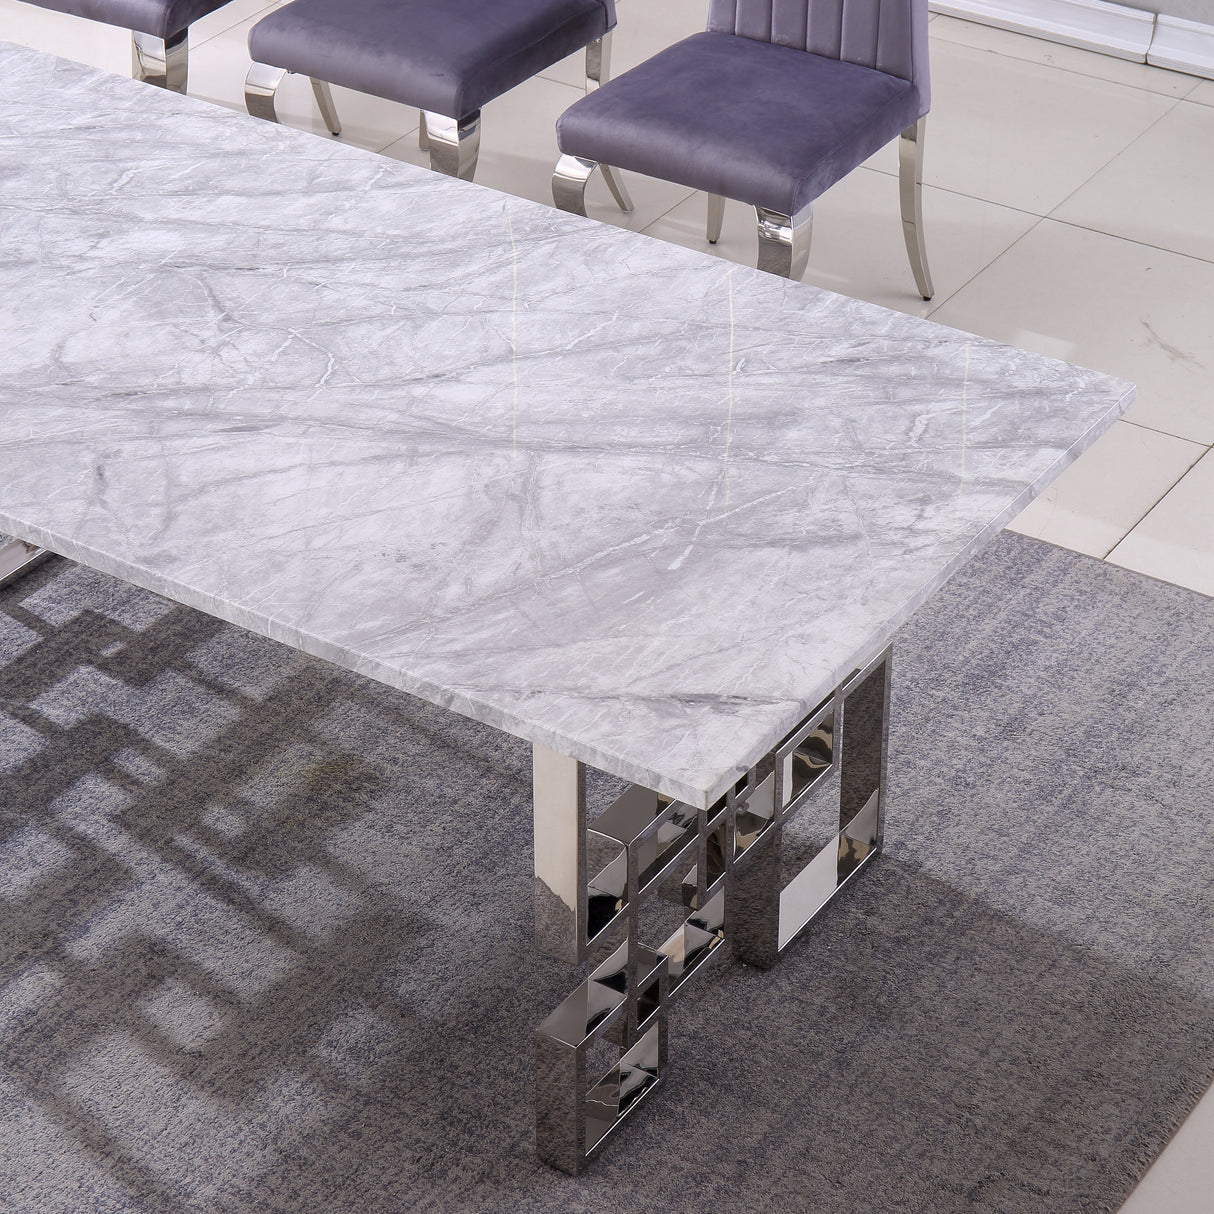 Contemporary Rectangular Marble Table, 0.71" Marble Top, Silver Mirrored Finish, Luxury Design For Home (78.7"x39.4"x29.9") - Home Elegance USA